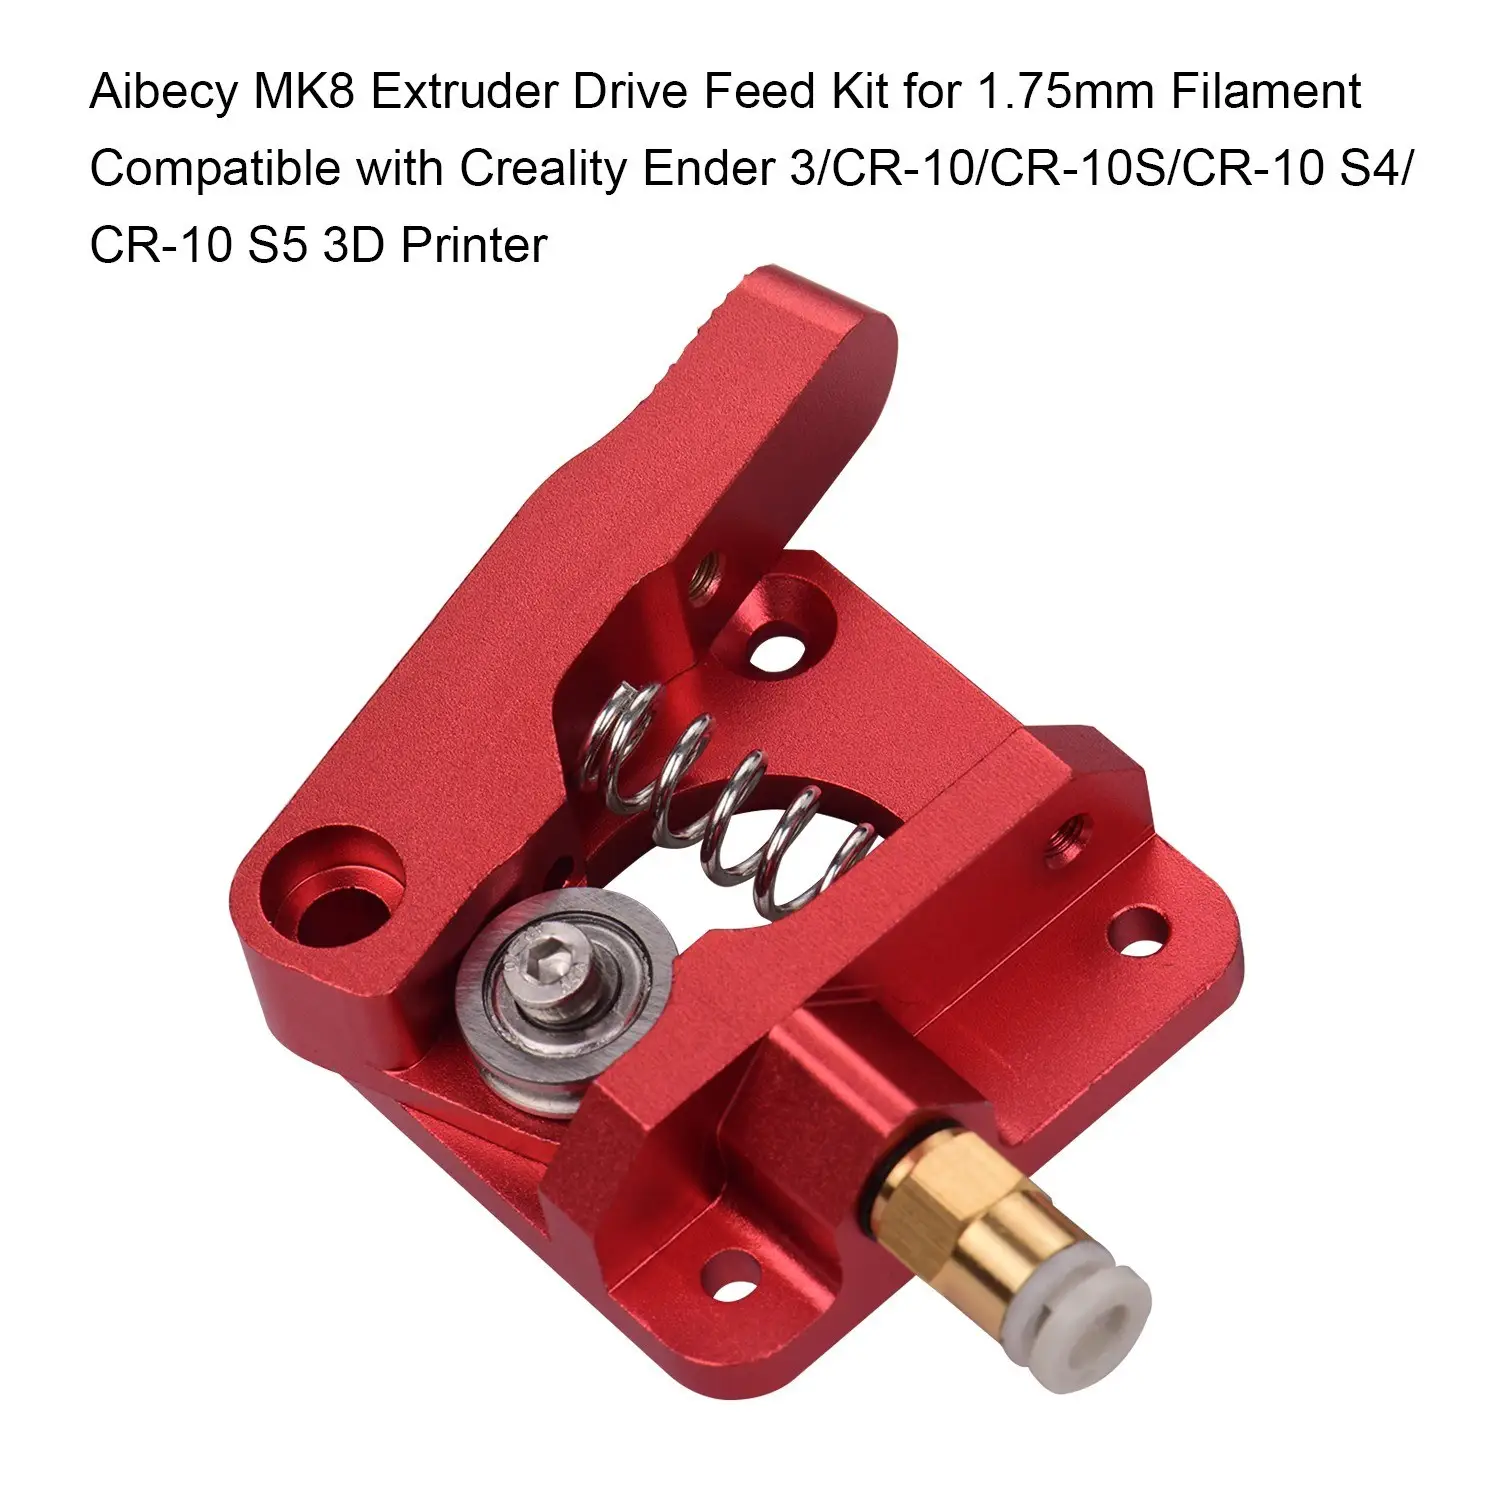 MK8 Extruder Drive Feed Kit Aluminum Alloy Block Right Hand for 1.75mm Filament Compatible with Creality Ender 3/CR-10/CR-10S/CR